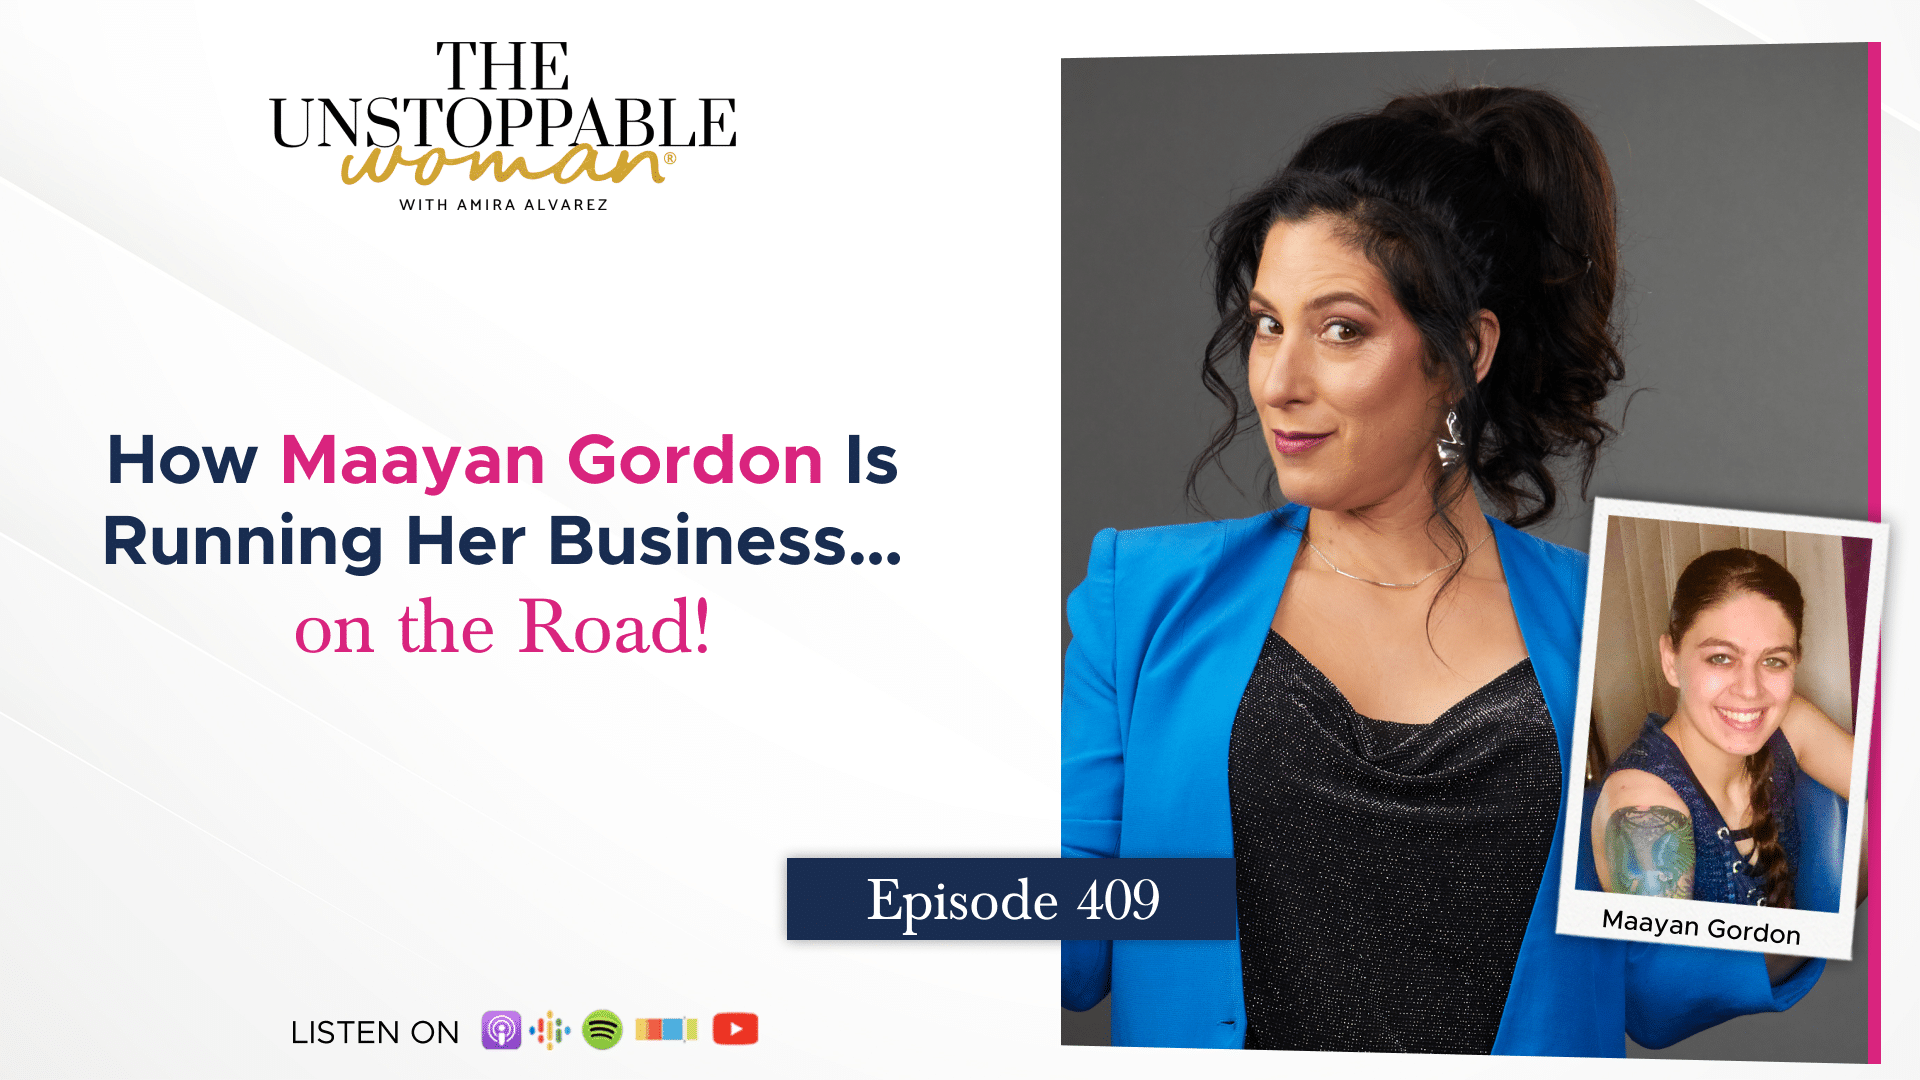 [Image: How Maayan Gordon Is Running Her Business… on the Road!]